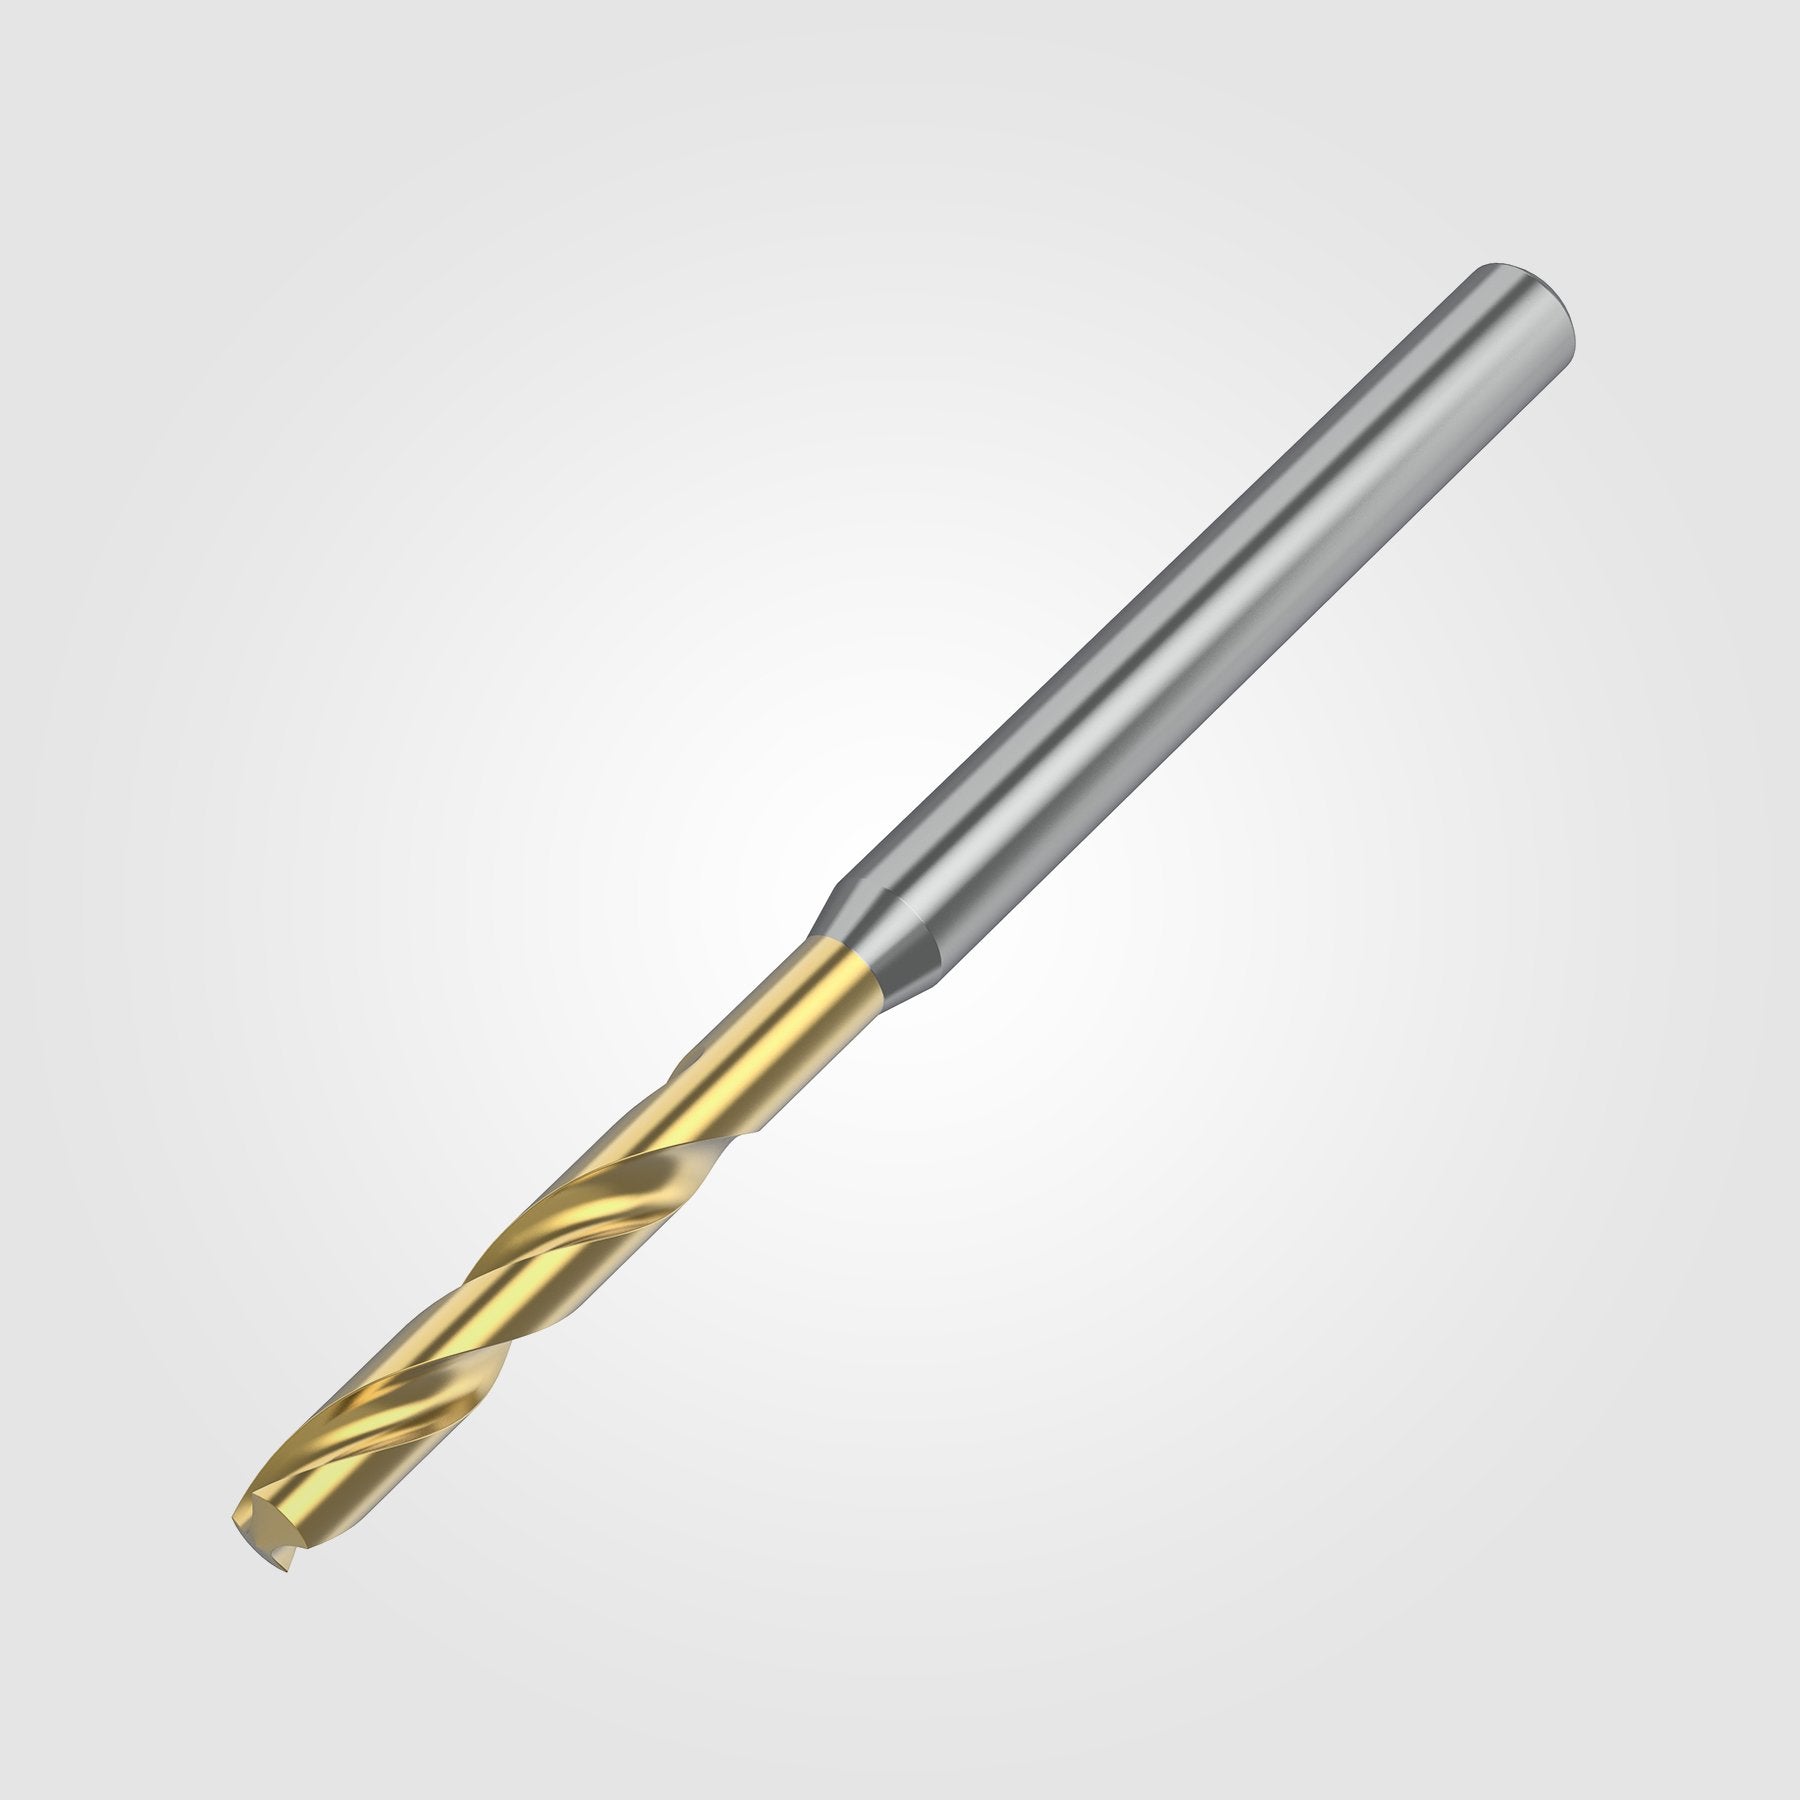 GOdrill | 10.716mm / .4219" / 3xD | SOLID CARBIDE DRILL | 4150295